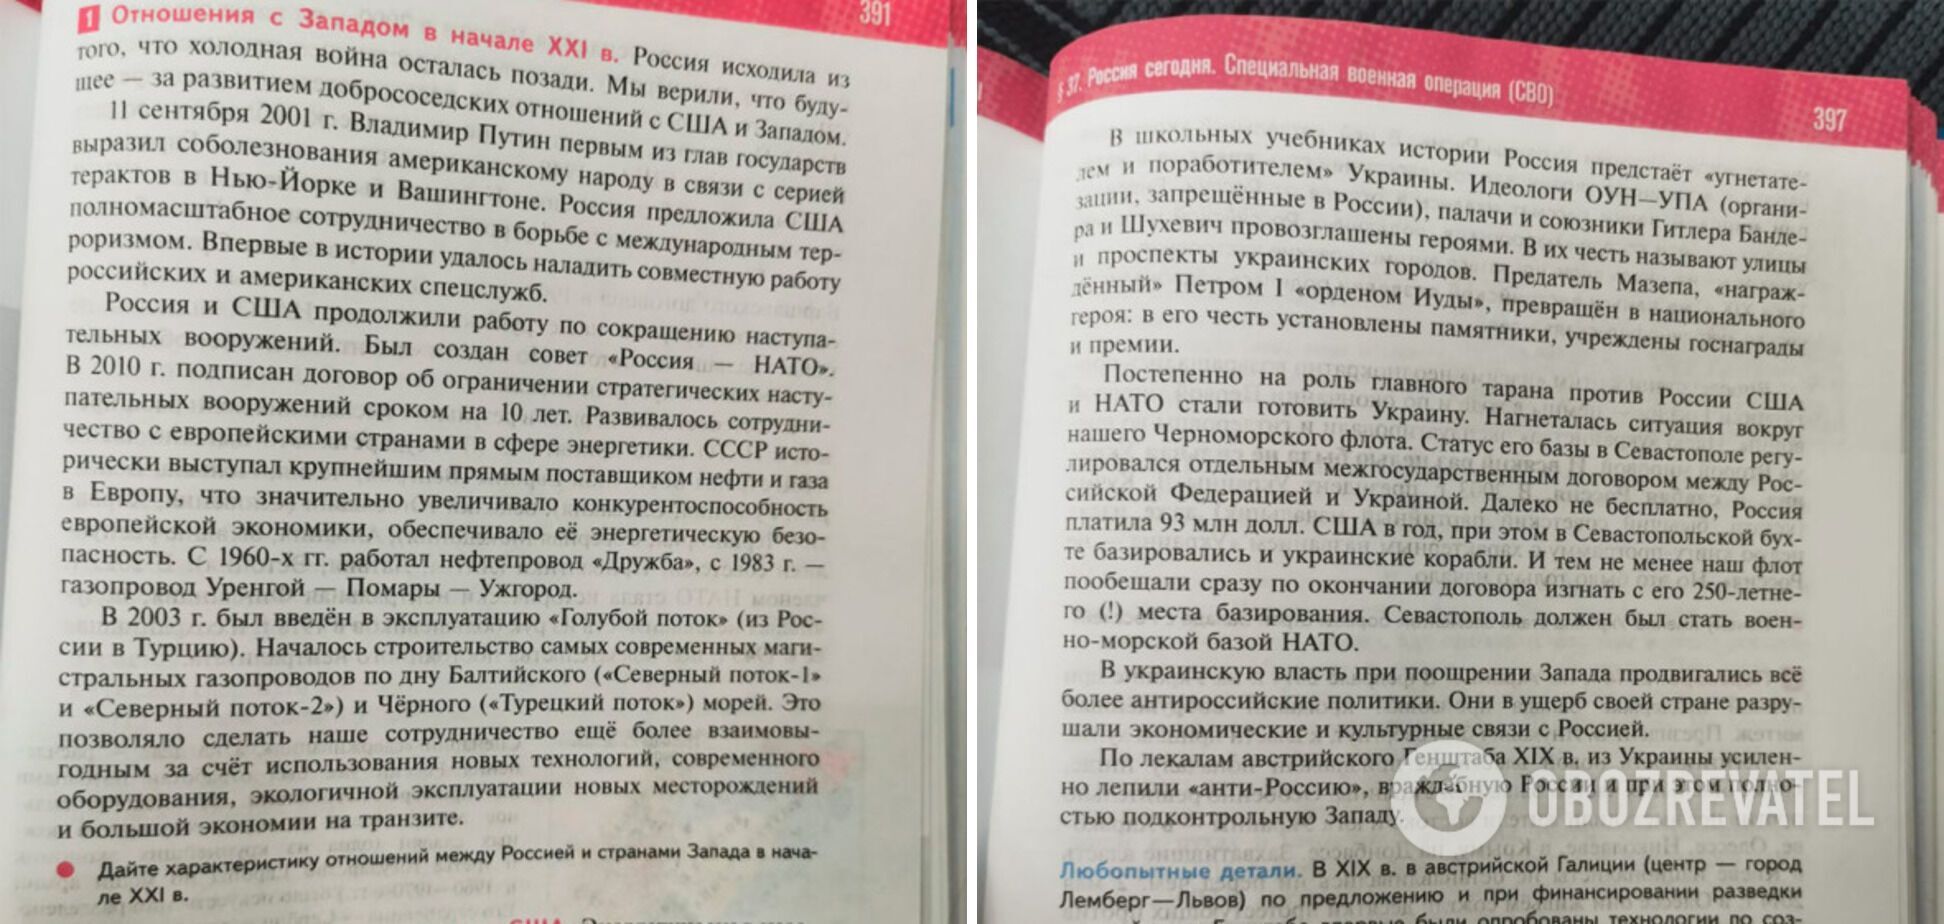 Russia has rewritten 50 years of history: new textbooks devote many pages to Ukraine